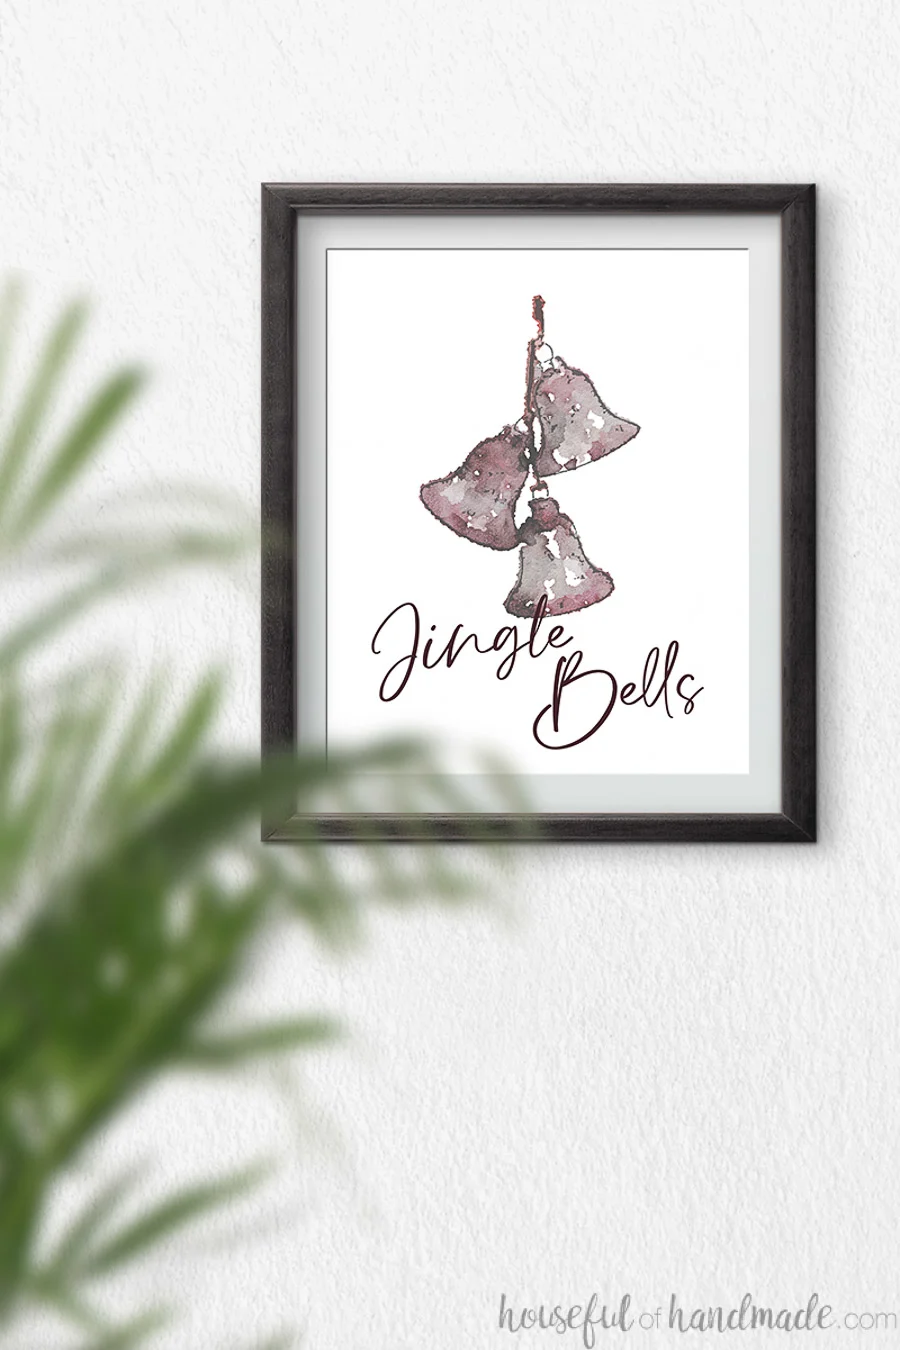 Watercolor of three reddish jingle bells hanging on a string with script writing Jingle Bells over the bottom of it.